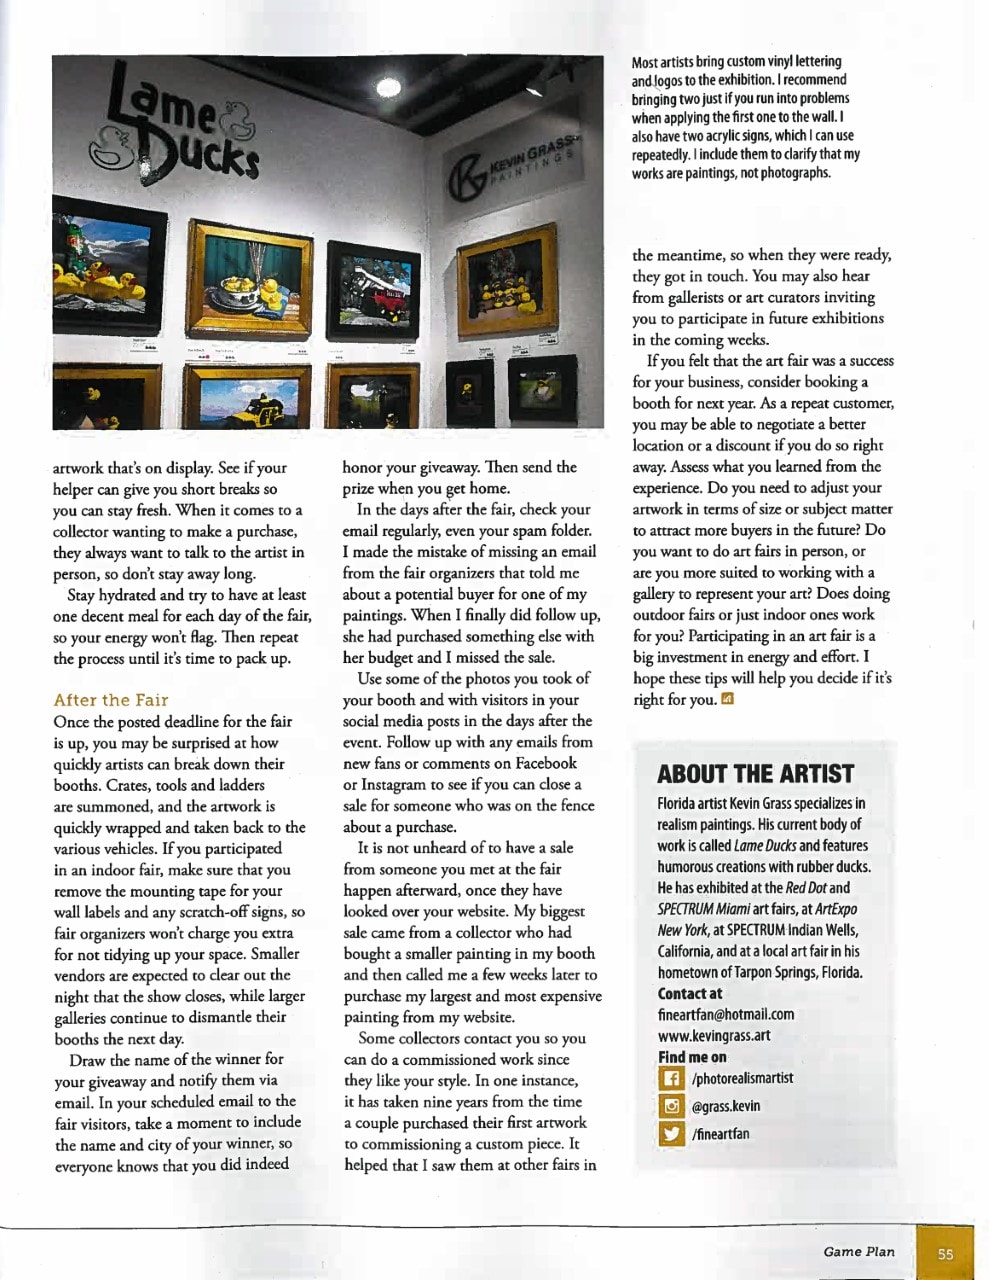 Page 6 of article on how to prepare for a successful art fair